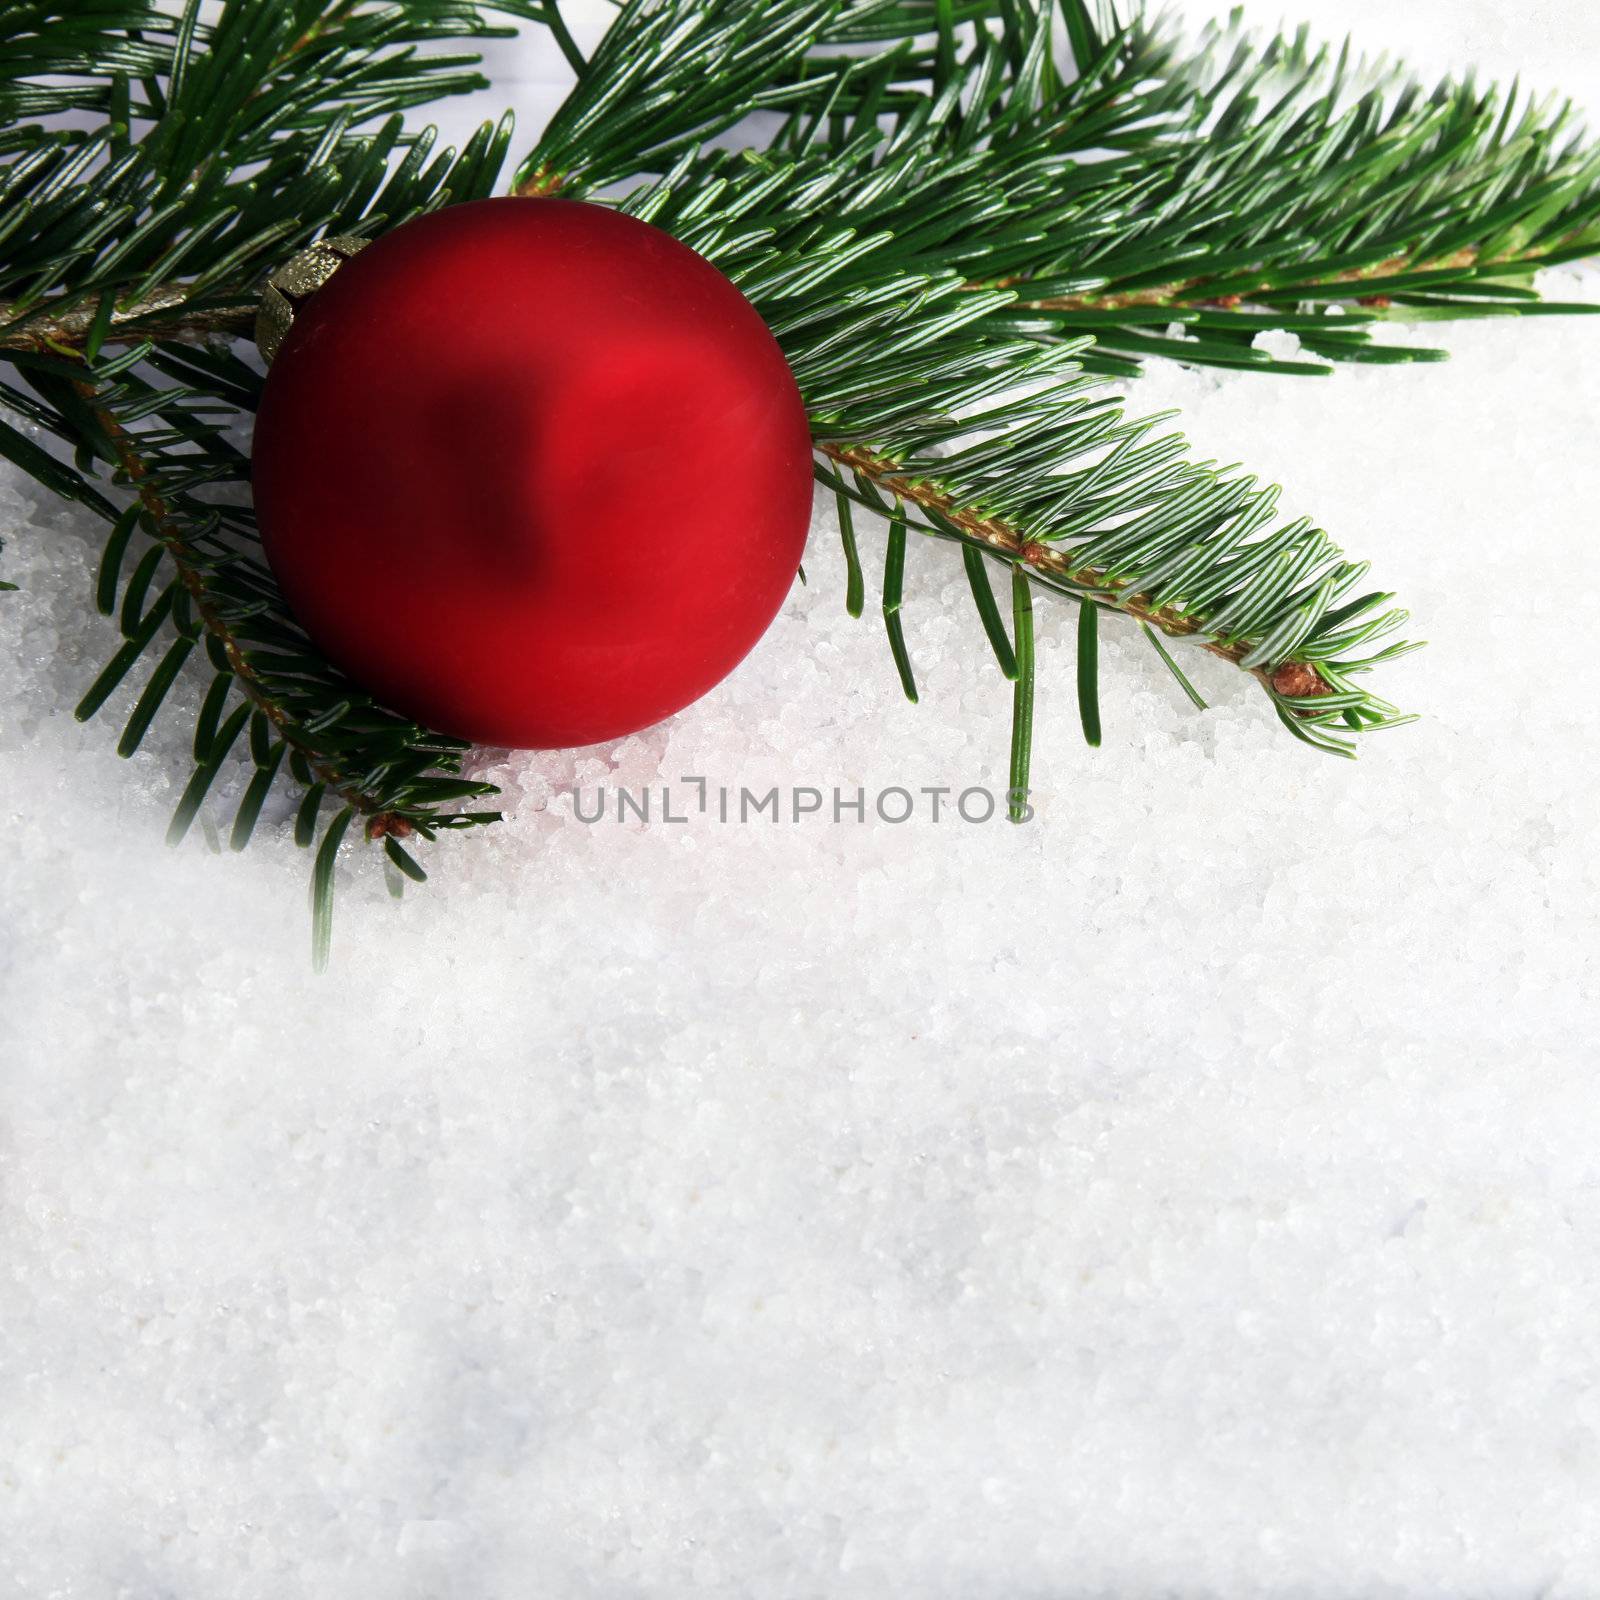 Red Christmas bauble and pine tree branches on snow